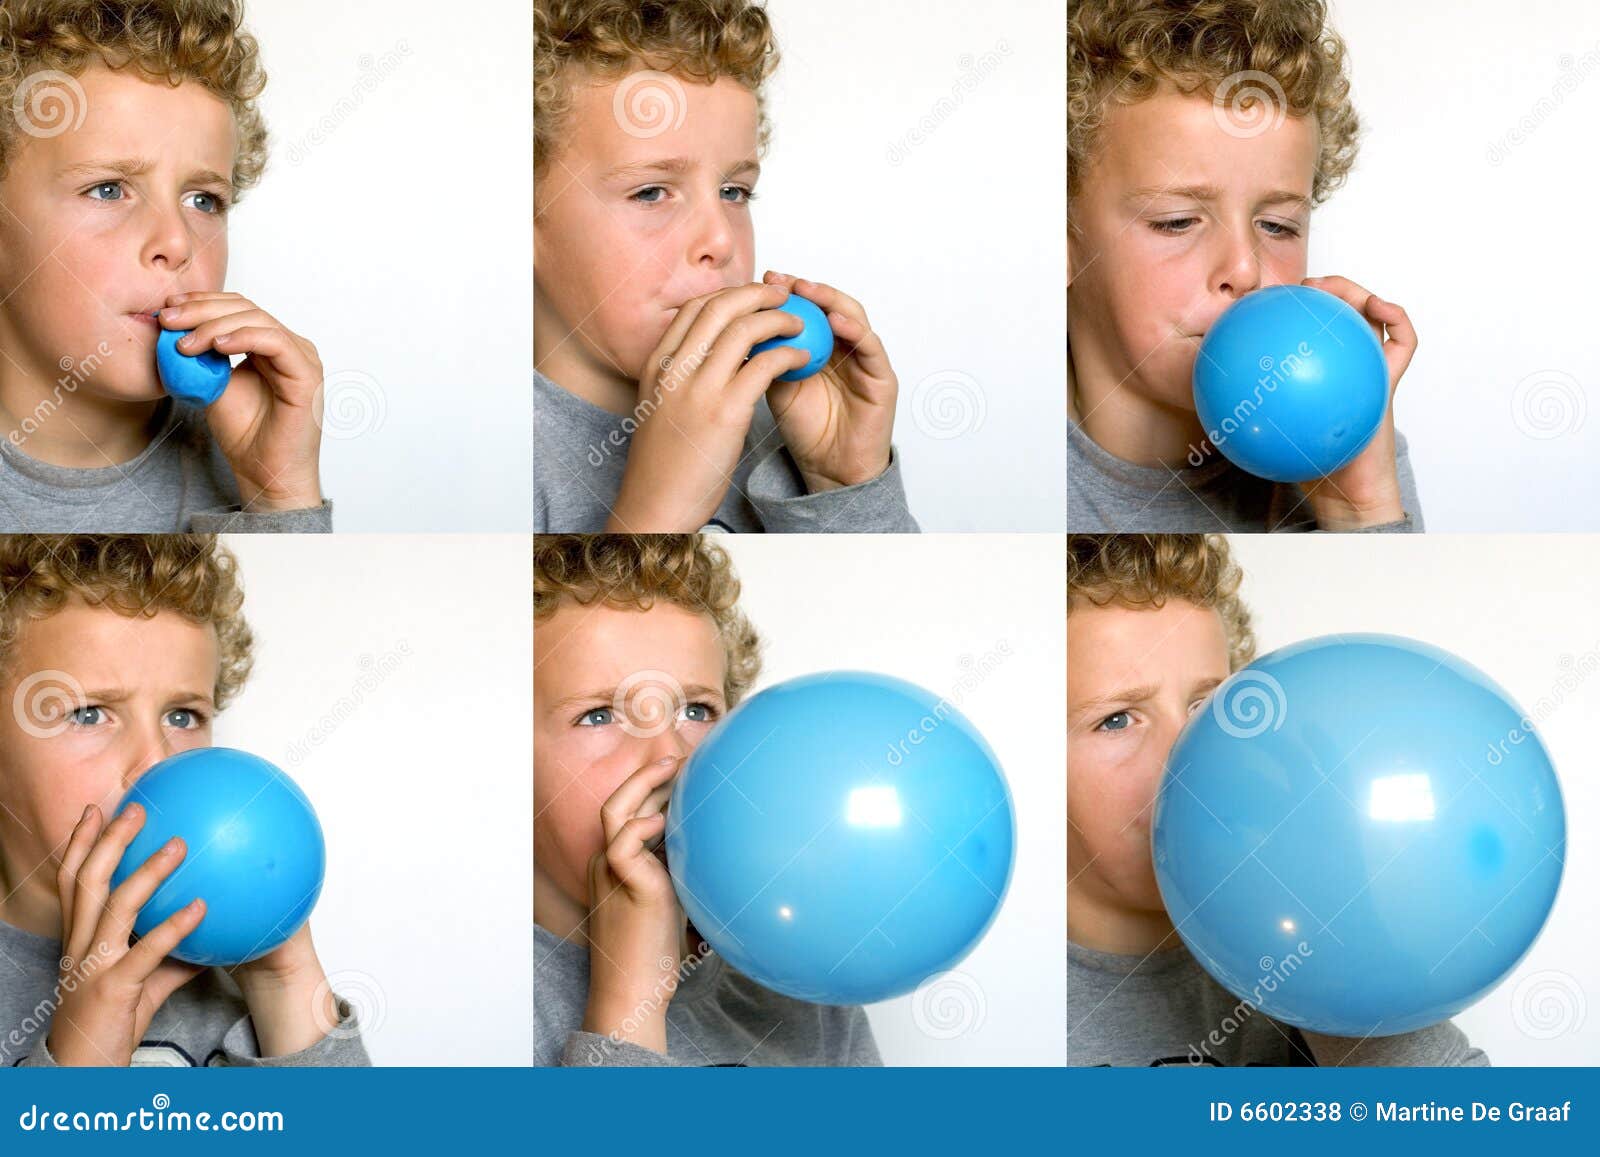 boy blowing up balloon